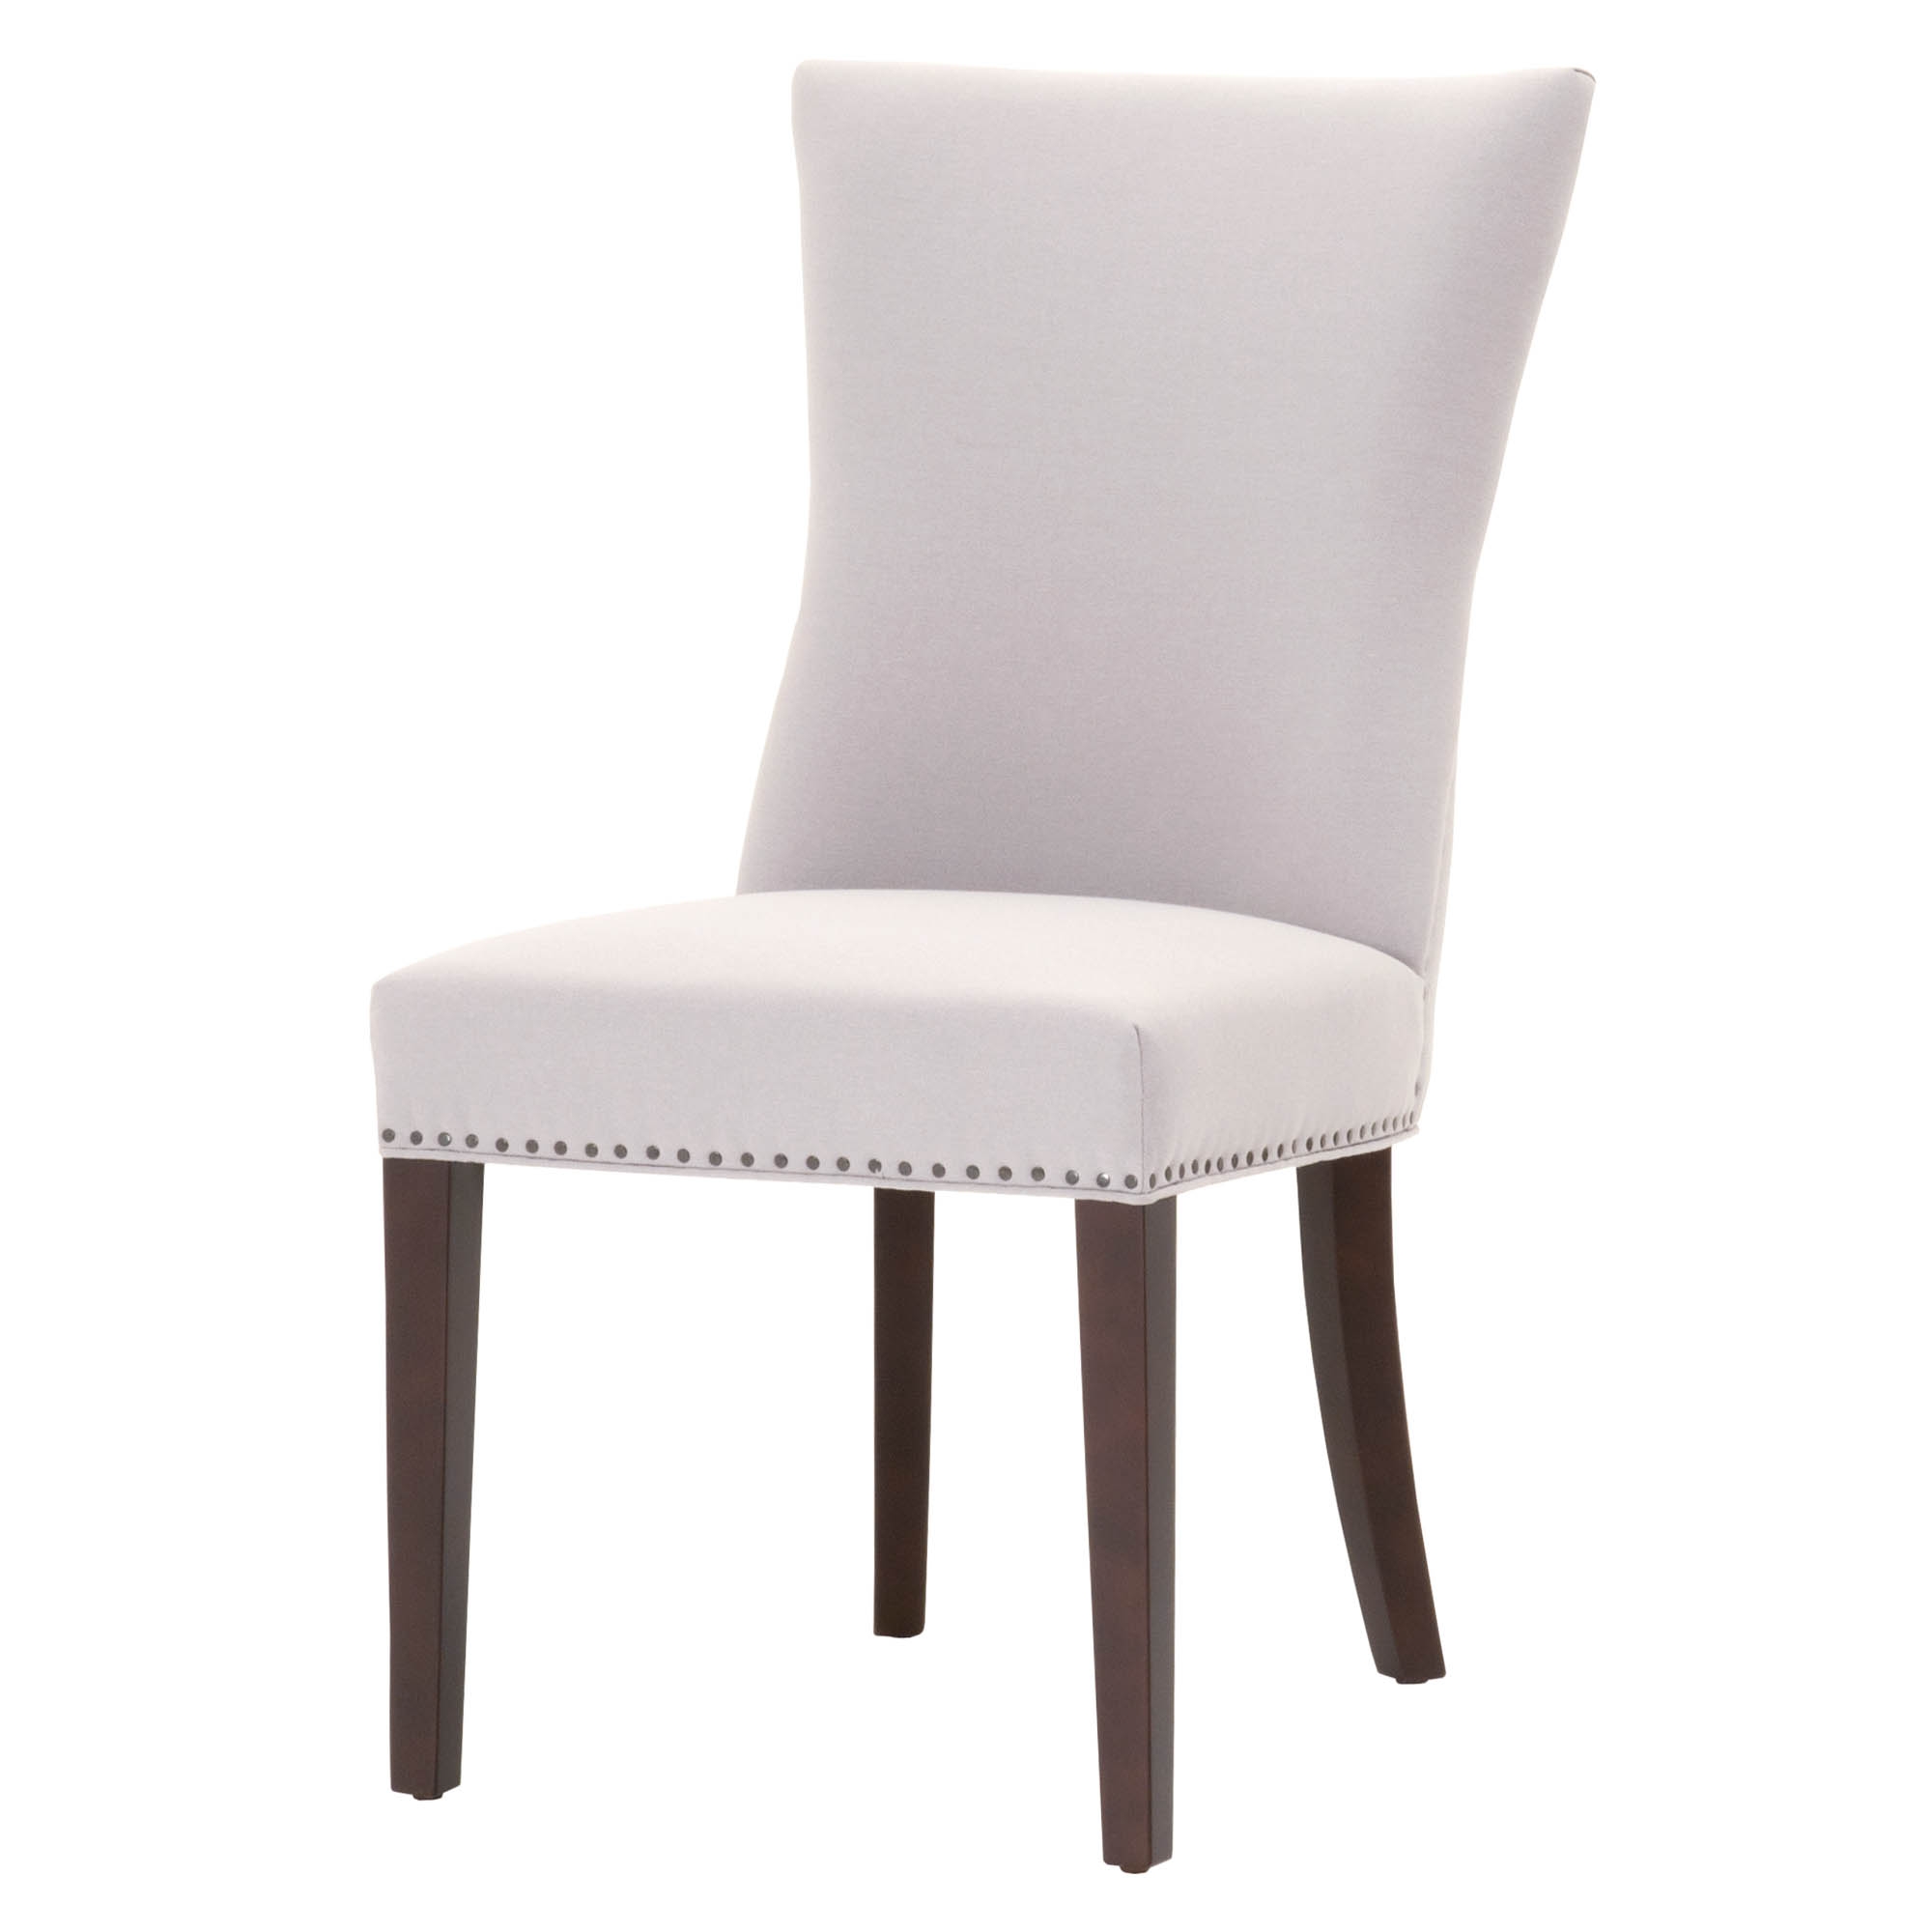 Avery Dining Chair, Set of 2 - Image 1